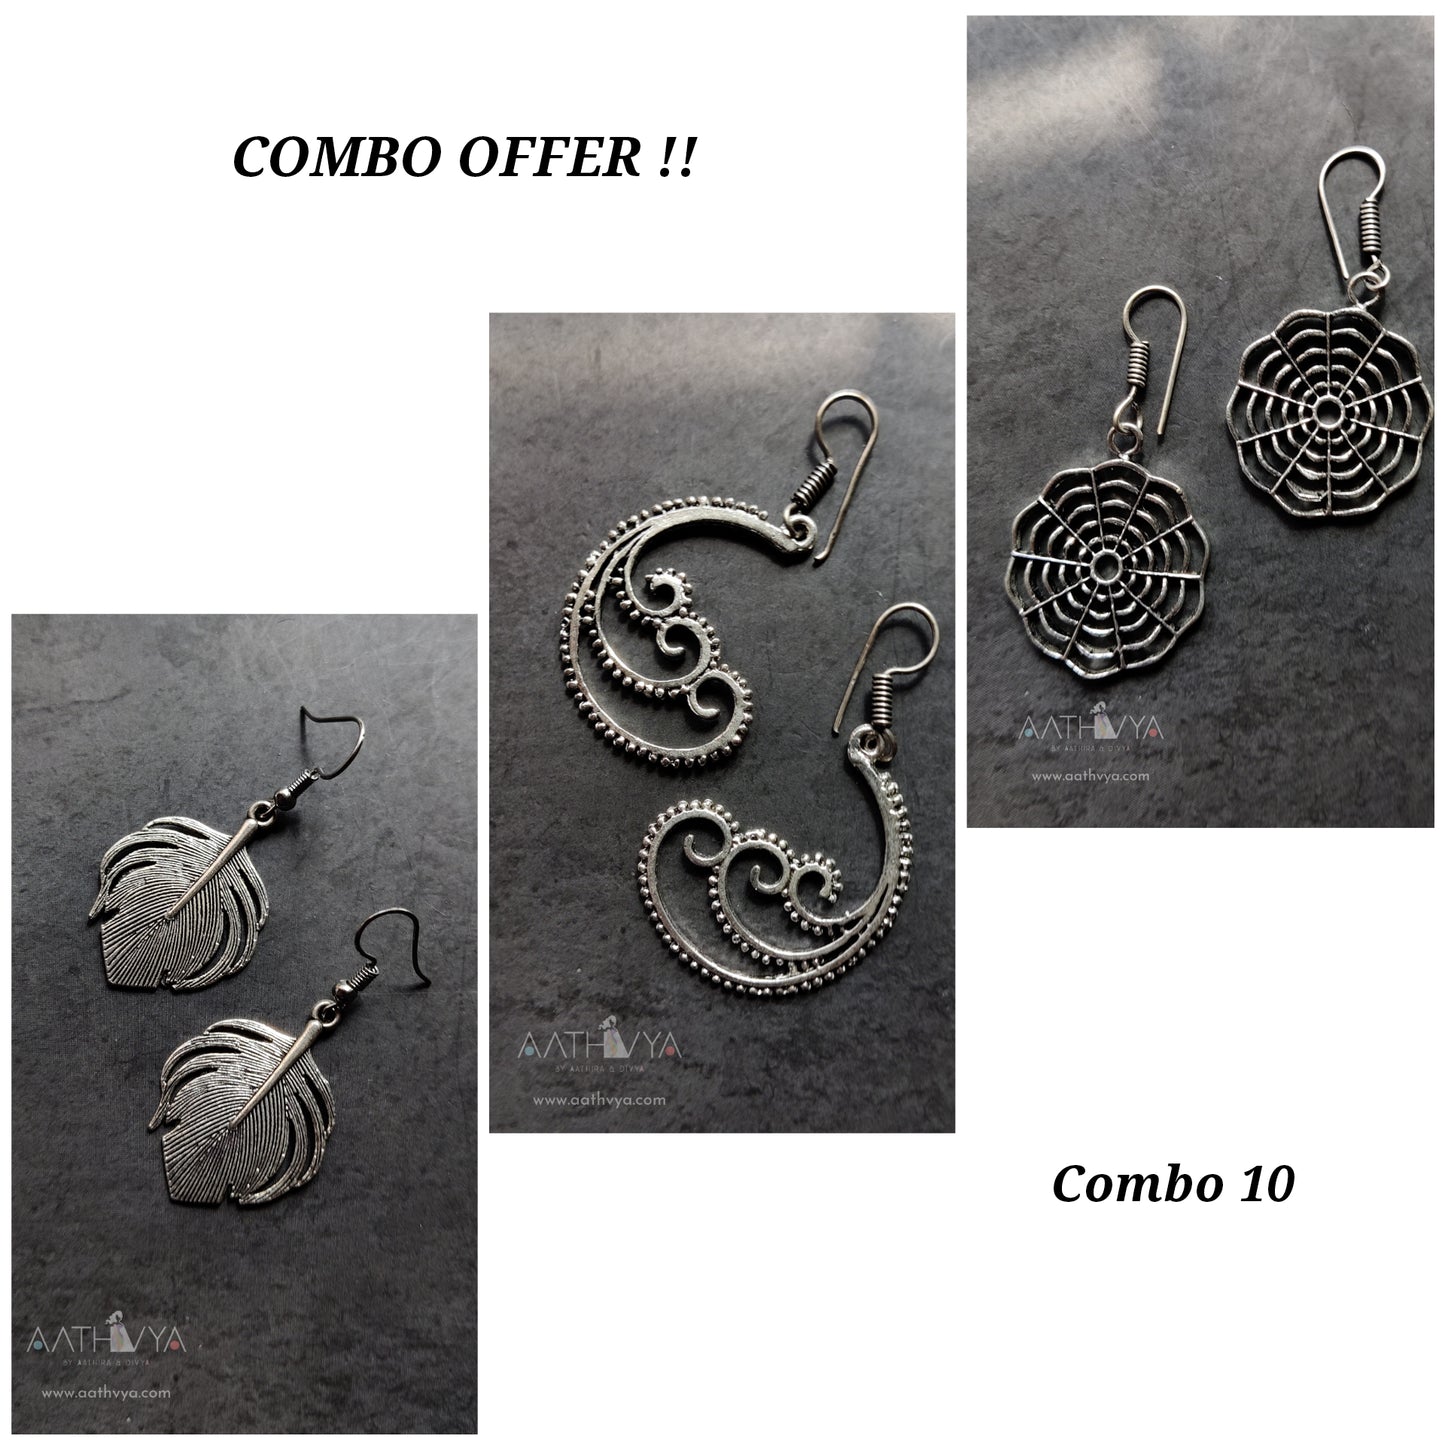 COMBO OFFER - AE1483